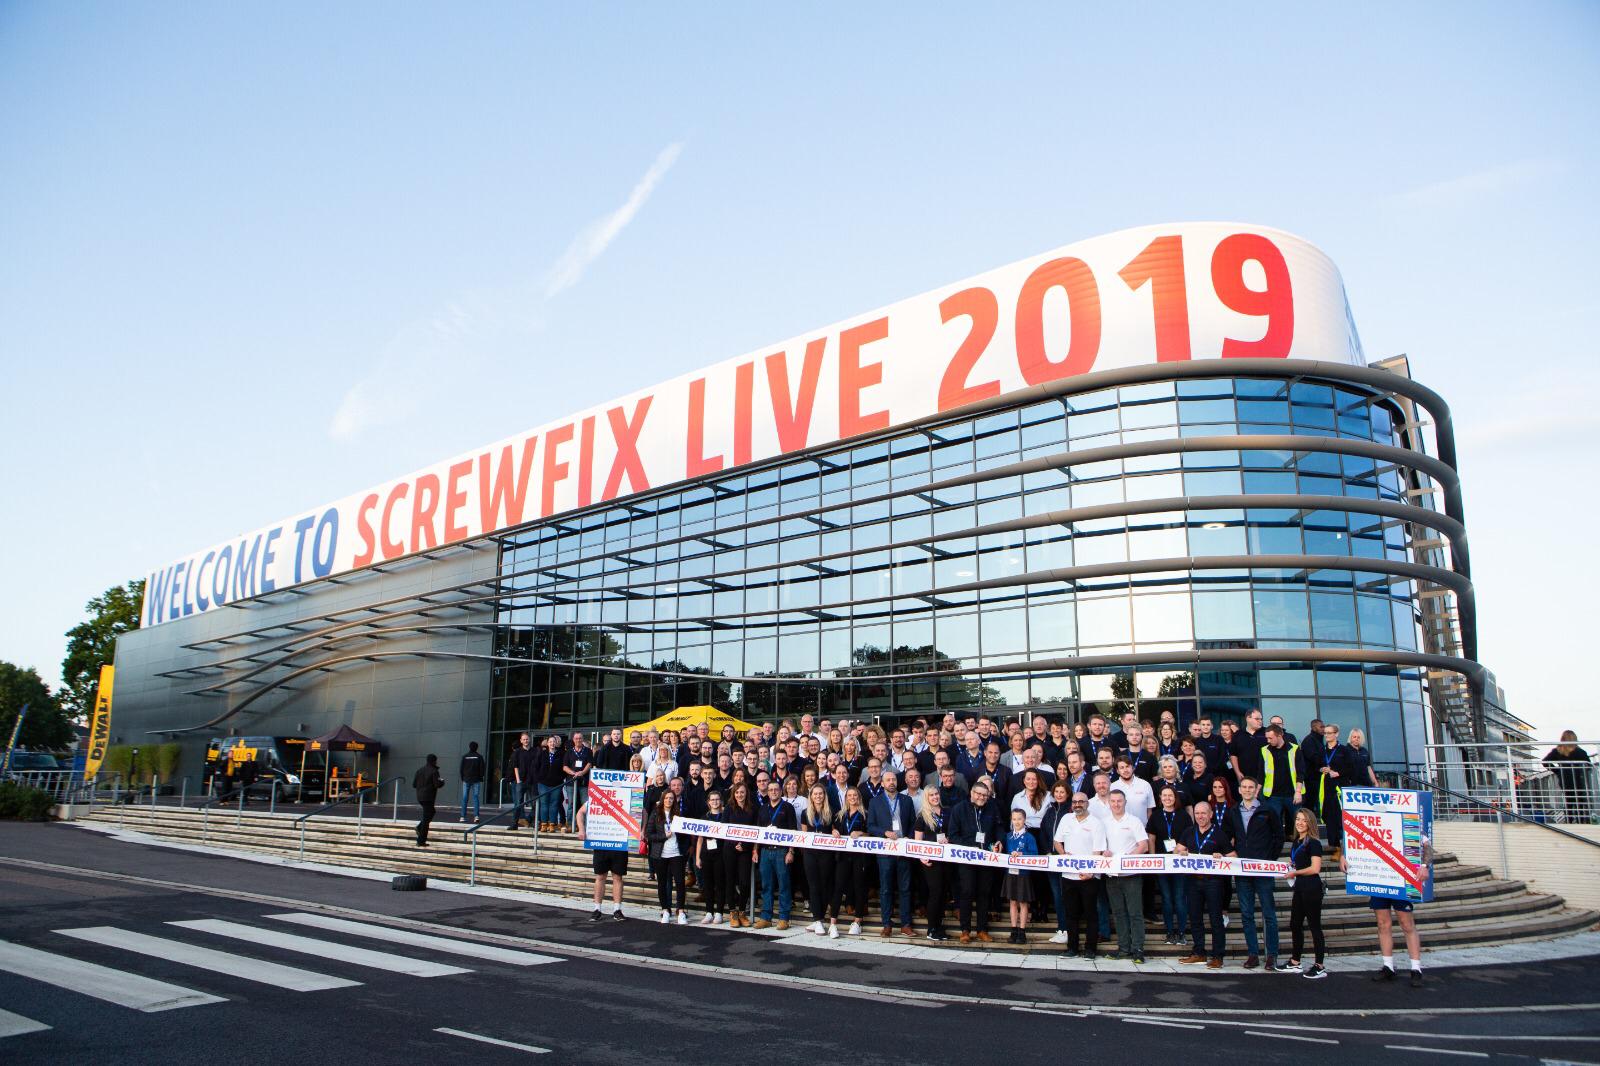 Screwfix LIVE is open for business! @Screwfix